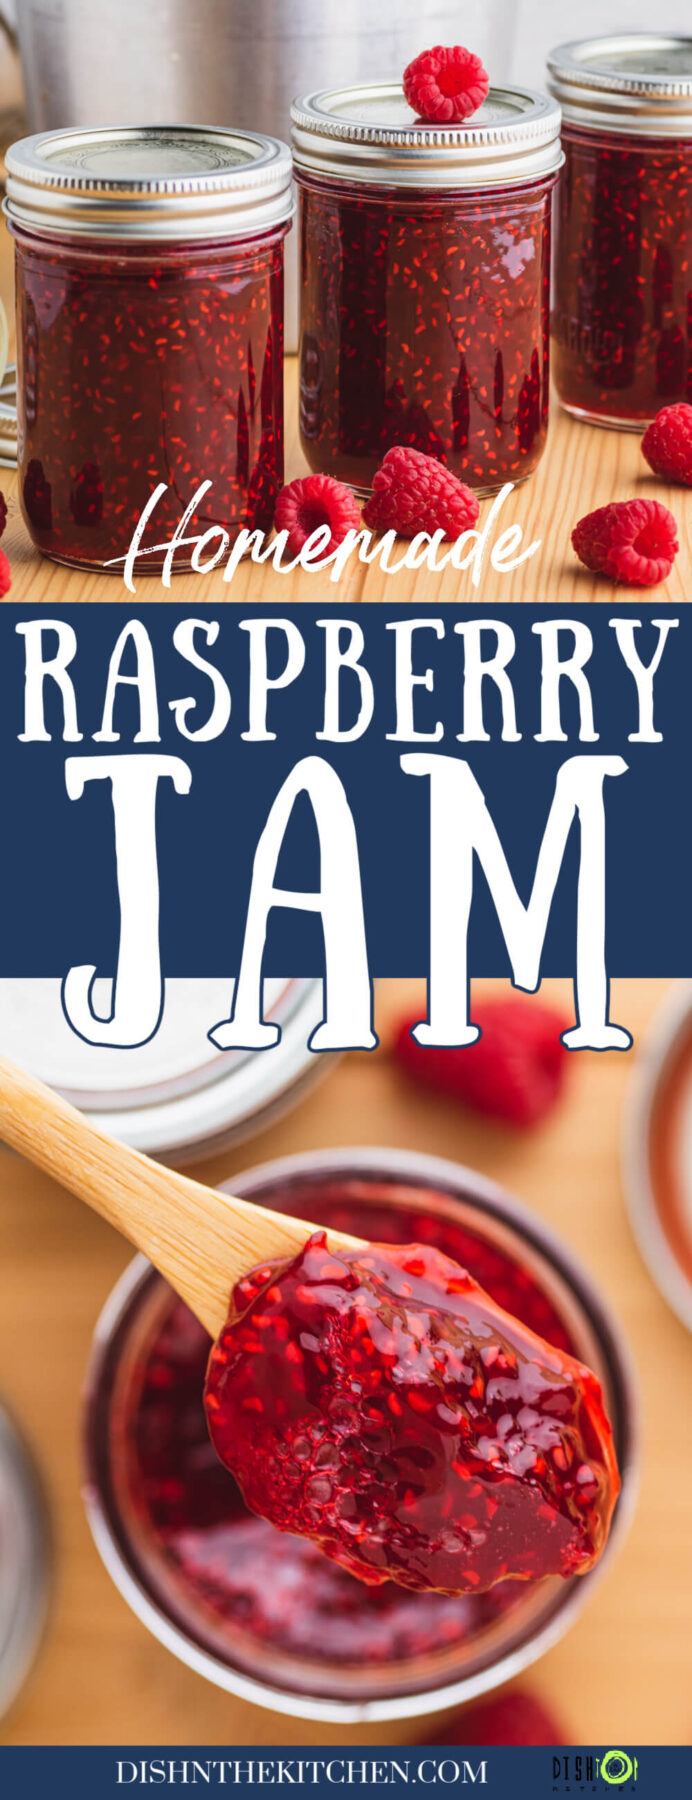 Pinterest image of three jars of bright red raspberry jam over another photo of jam in a wooden spoon.